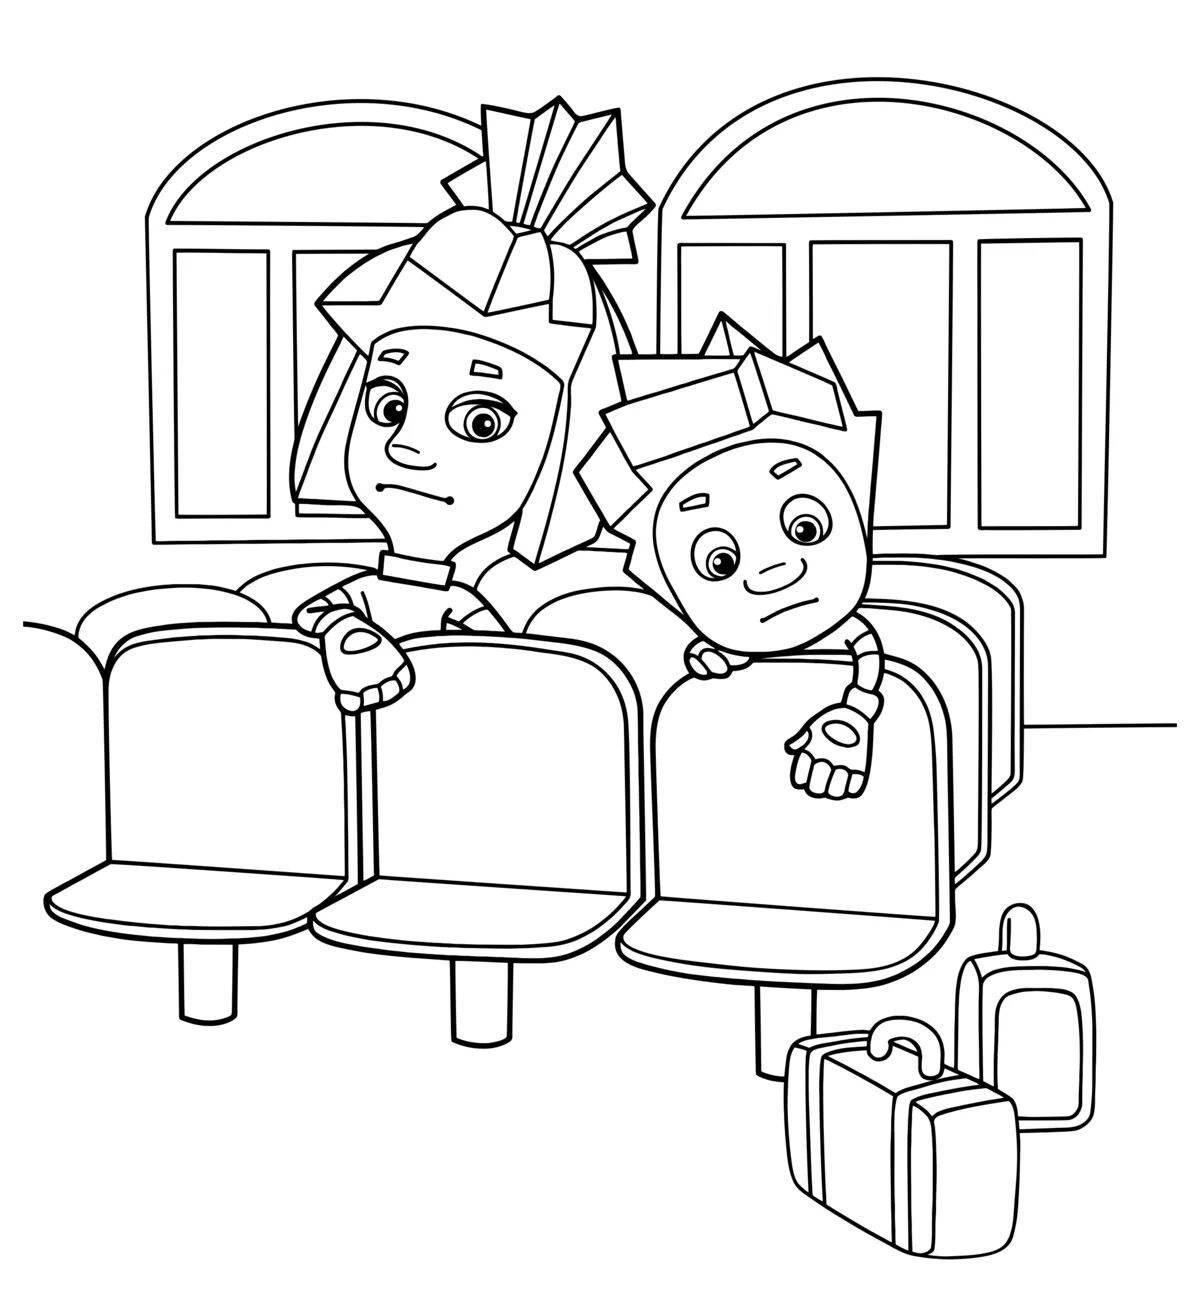 Coloring page adorable fixies railroad